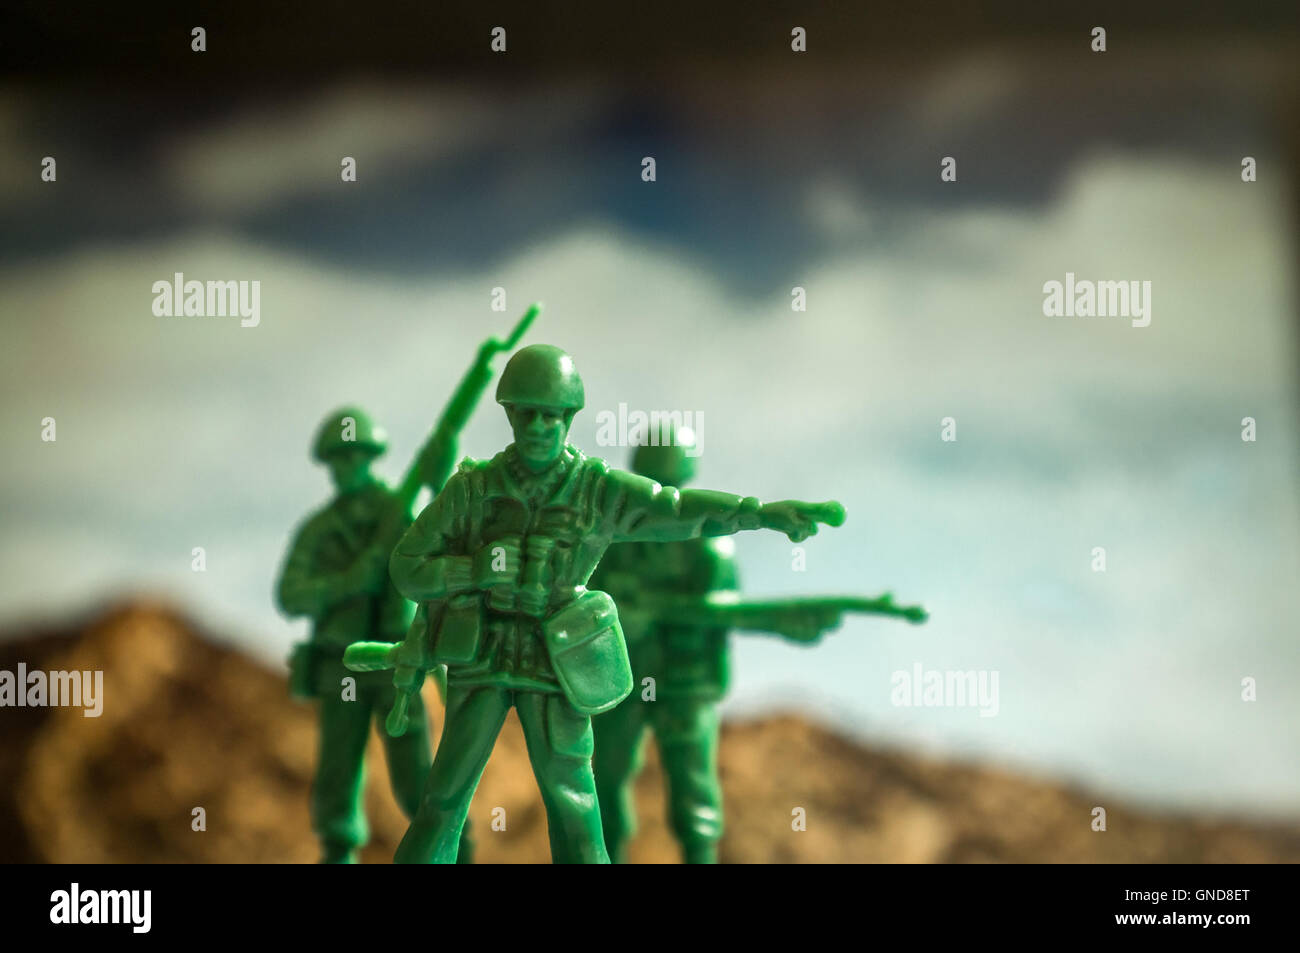 Green toy soldiers with mountaintops the lookout points the way Stock Photo